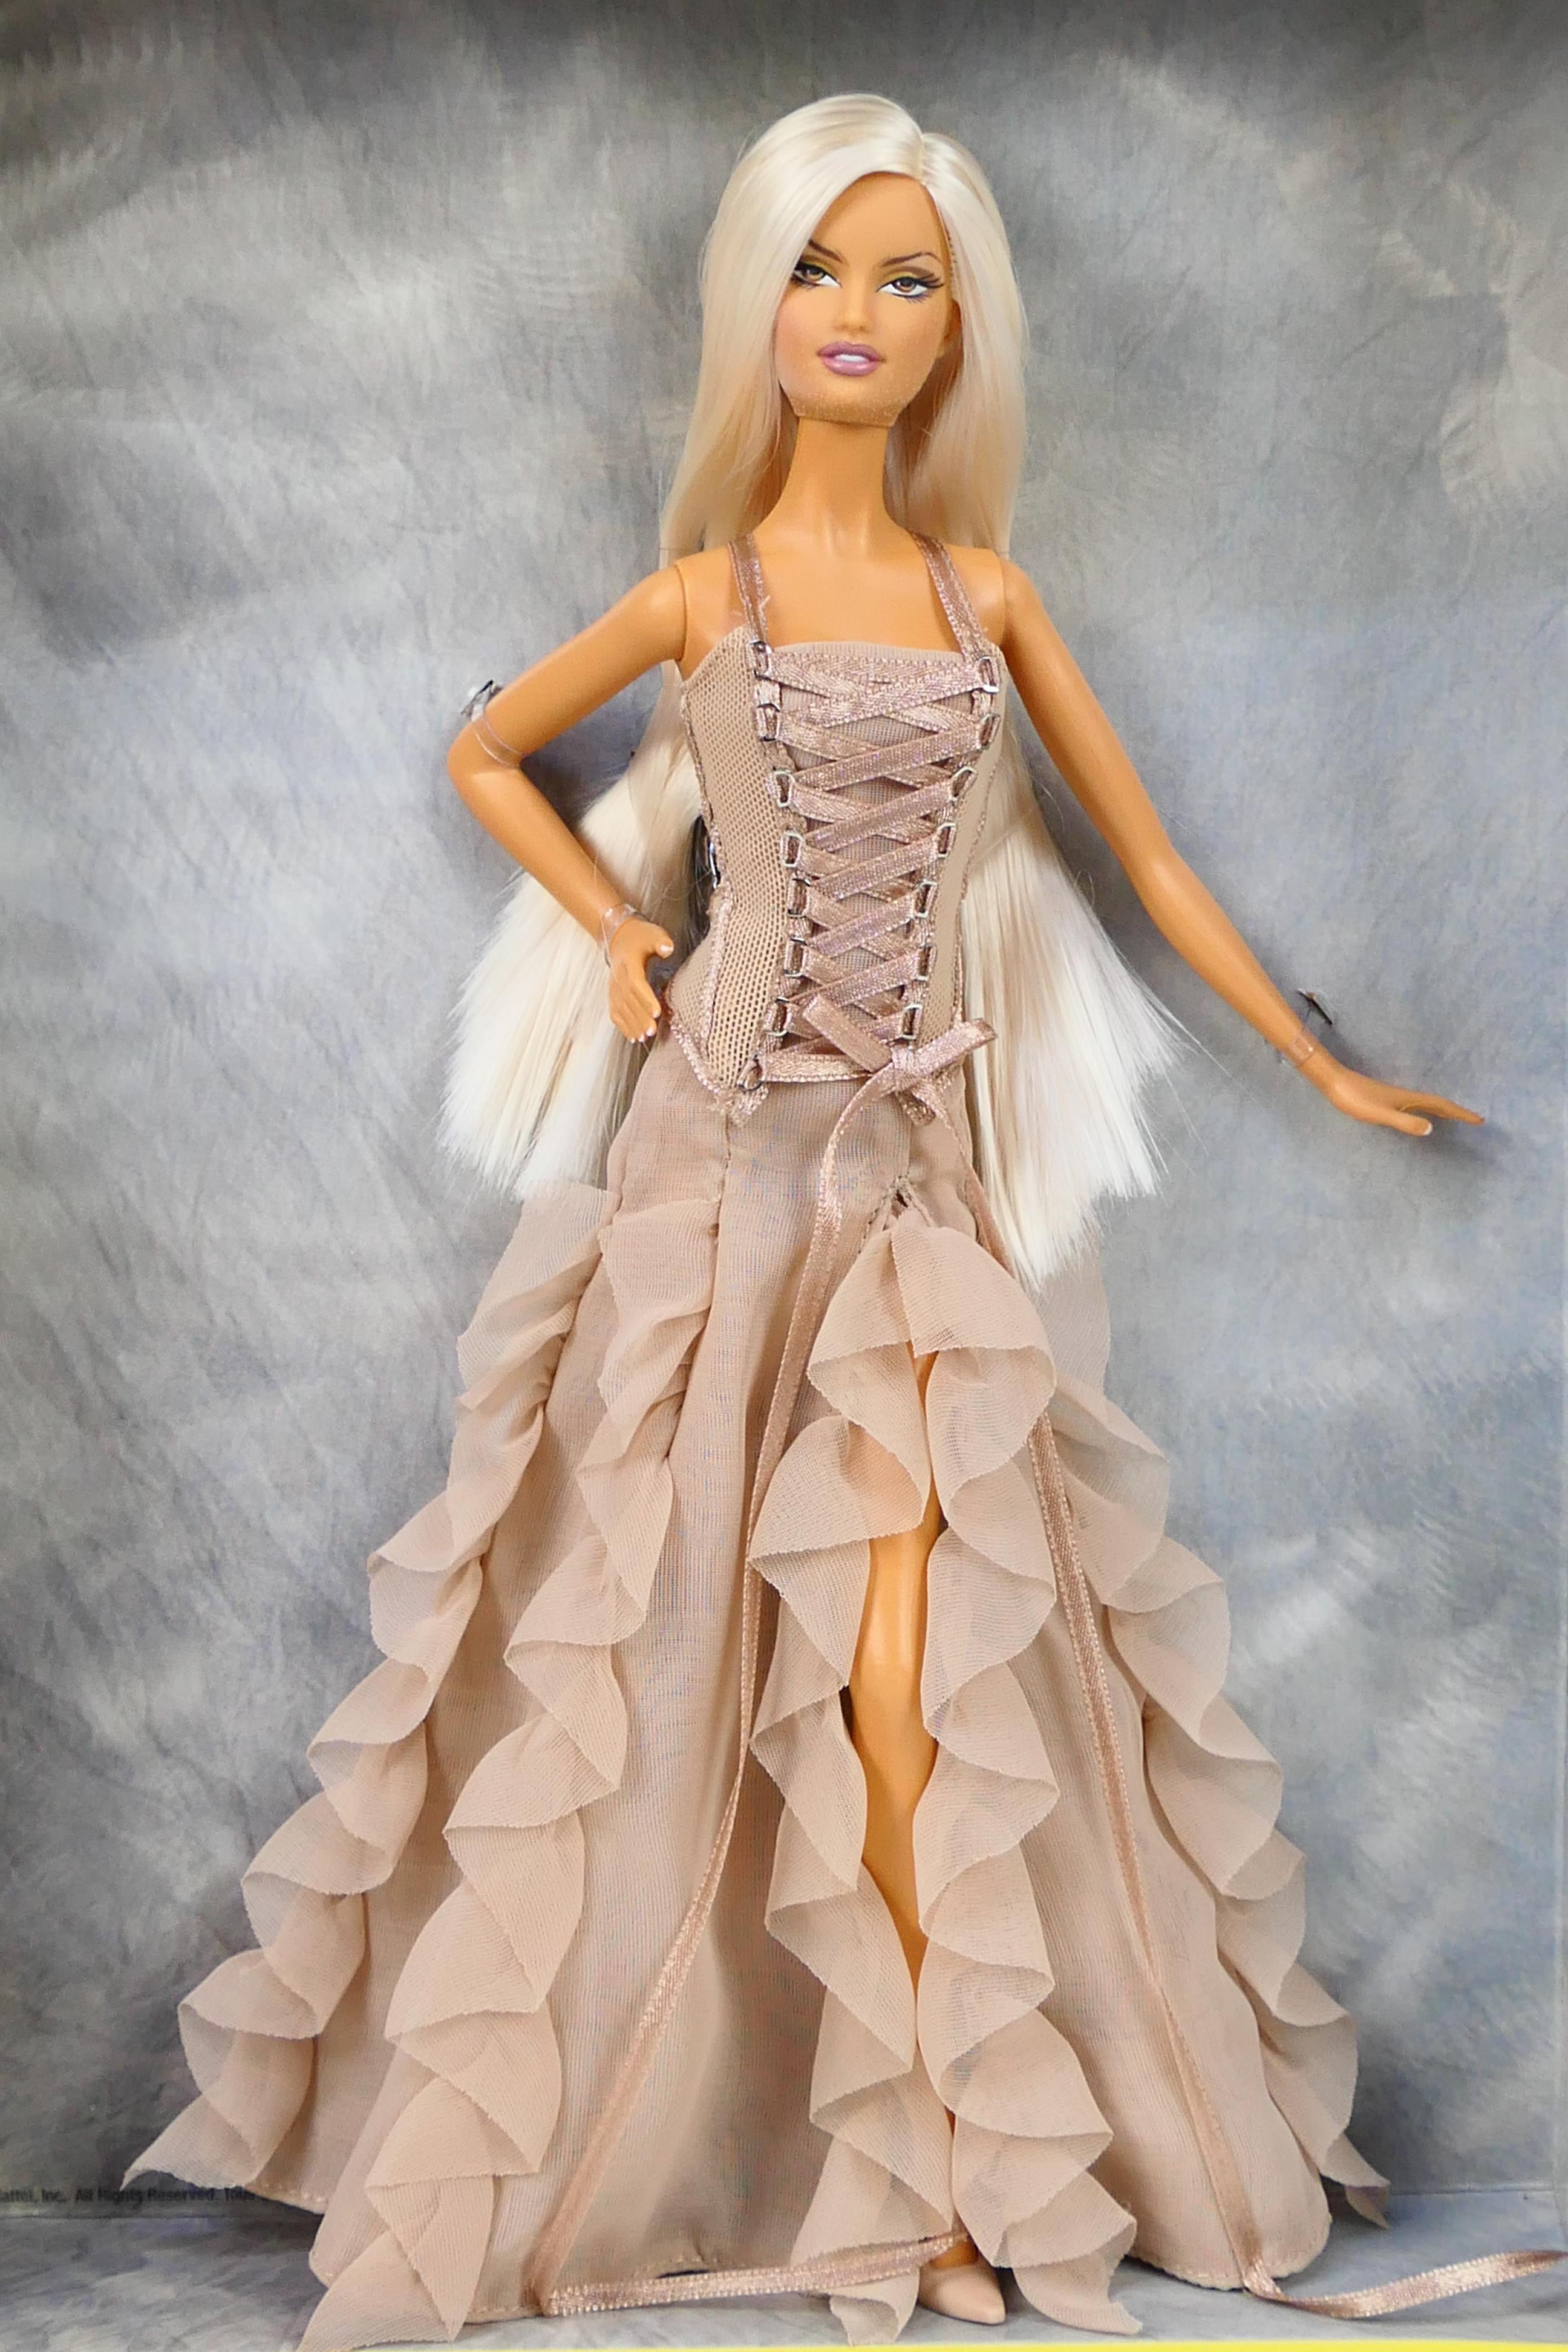 Mattel - Barbie - A limited edition boxed Barbie Versace from 2004 # B3457. - Image 2 of 5